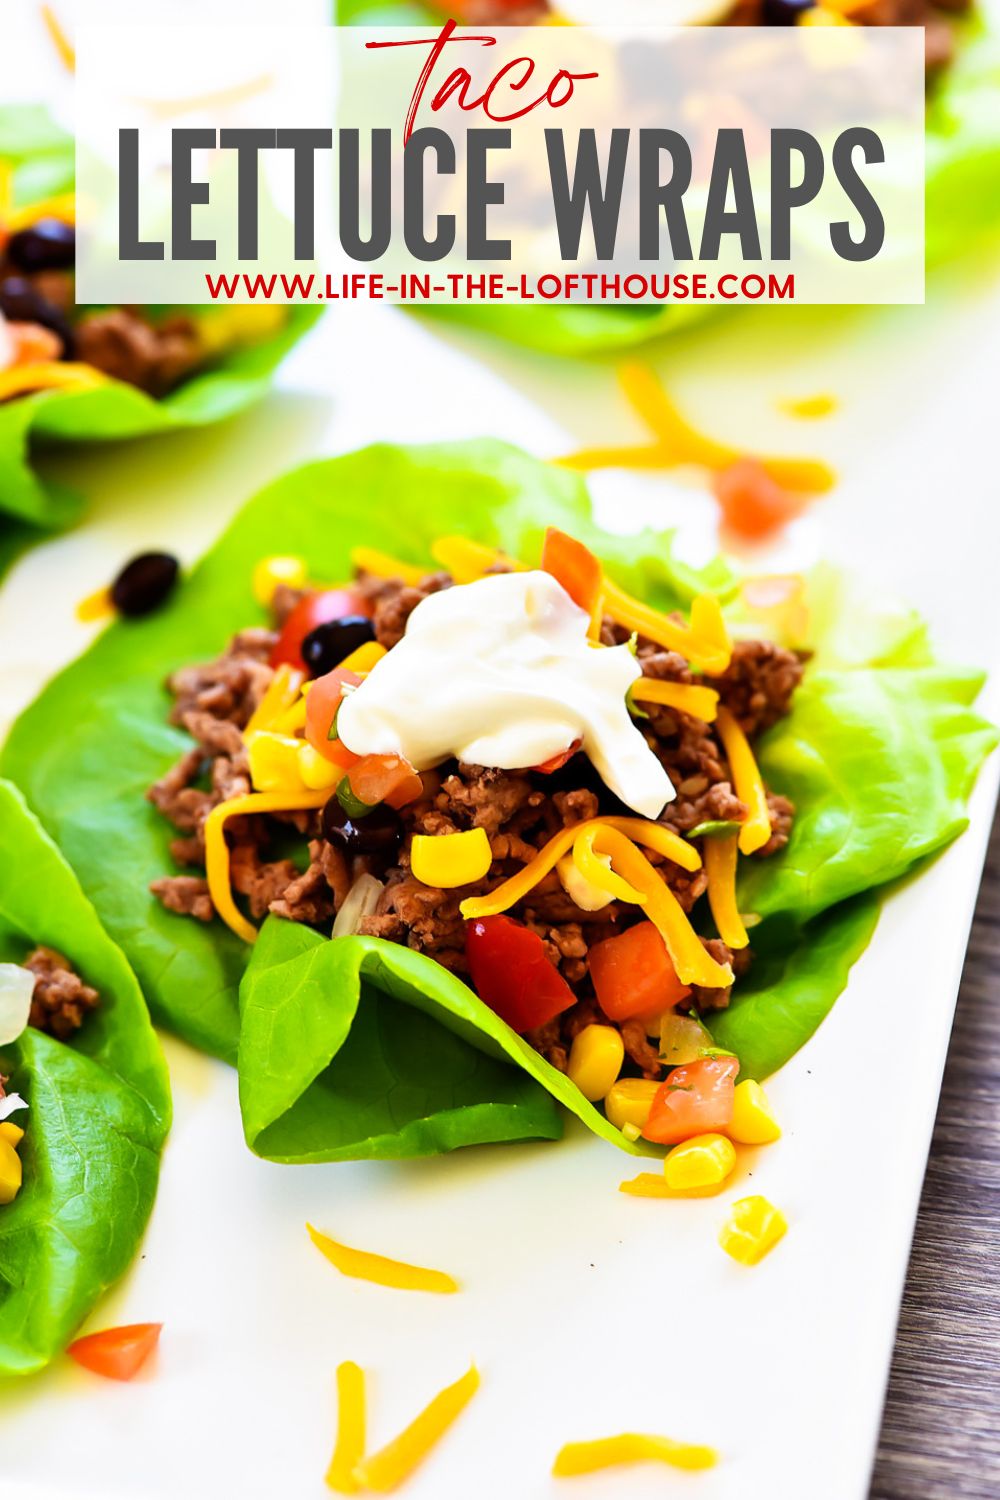 Taco Lettuce Wraps are filled with seasoned ground beef, corn, black beans, cheese and taco sauce. Life-in-the-Lofthouse.com